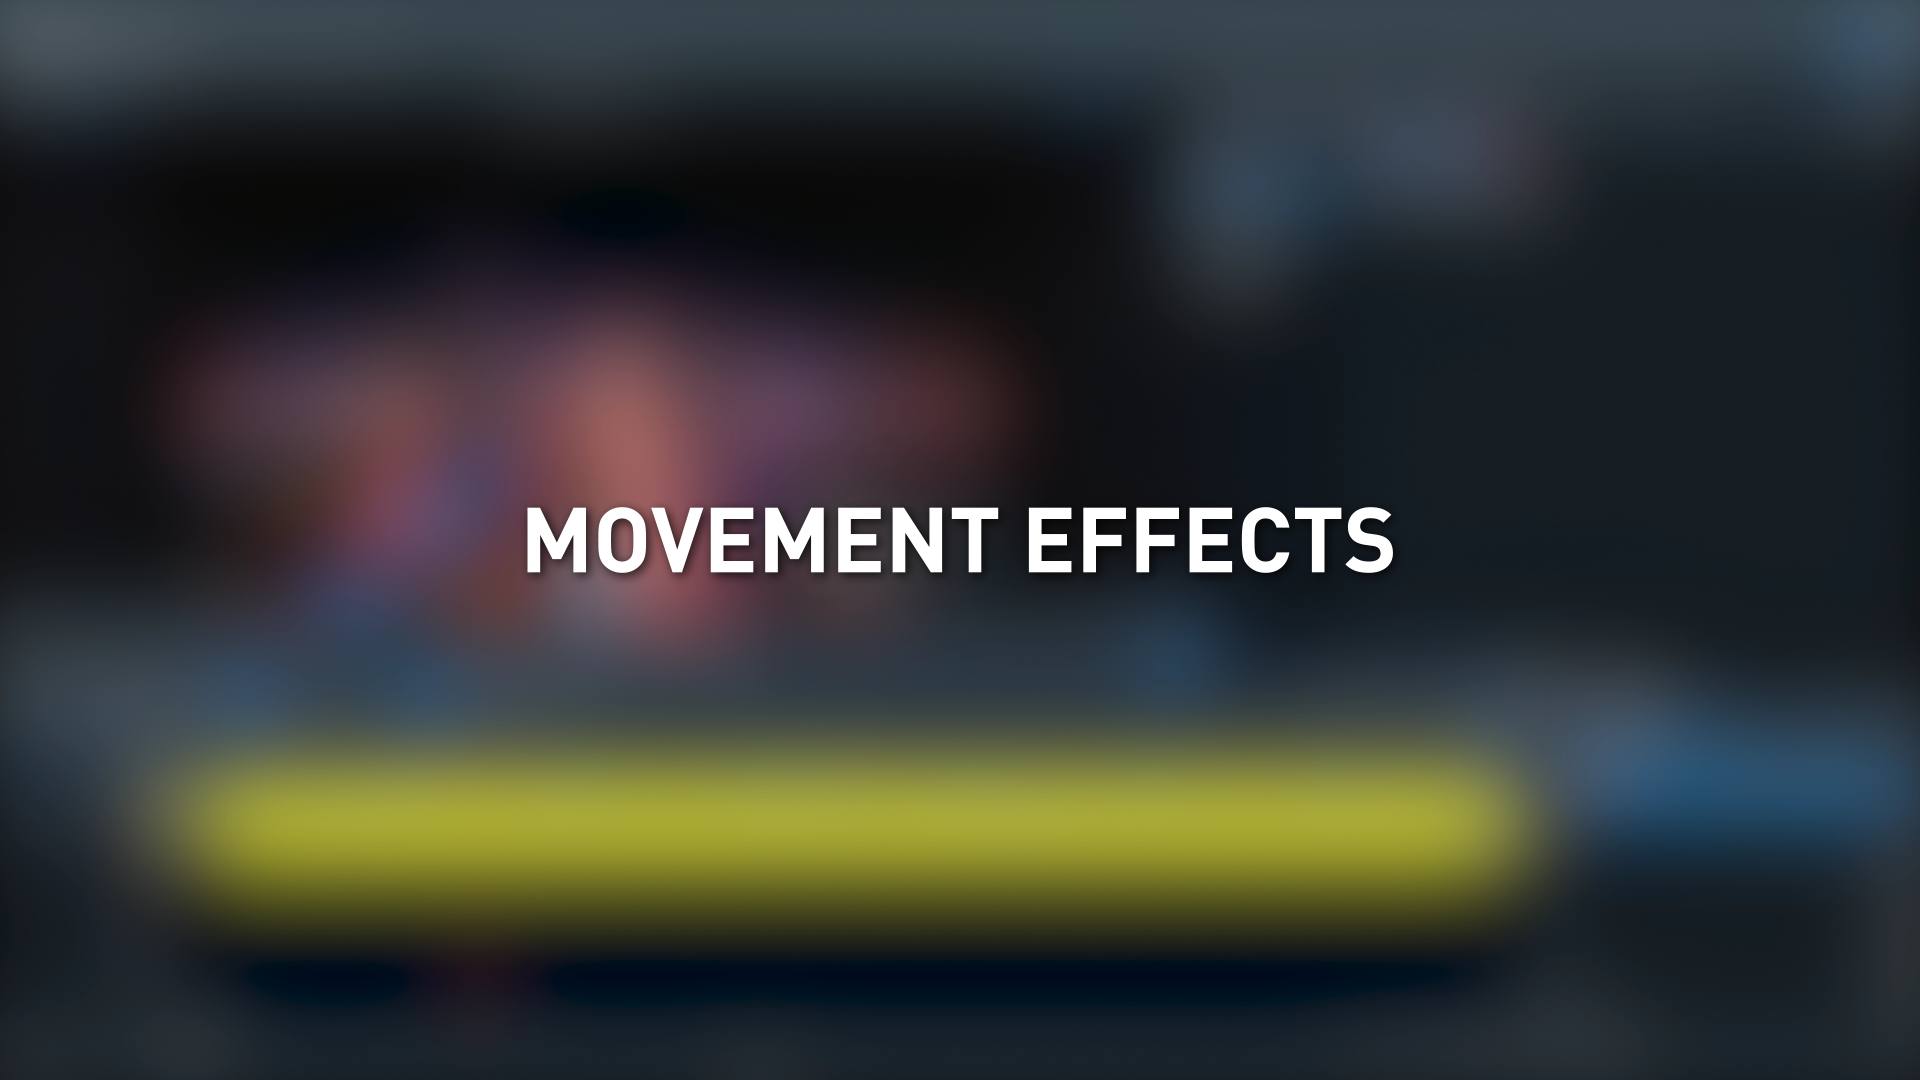 Movement effects